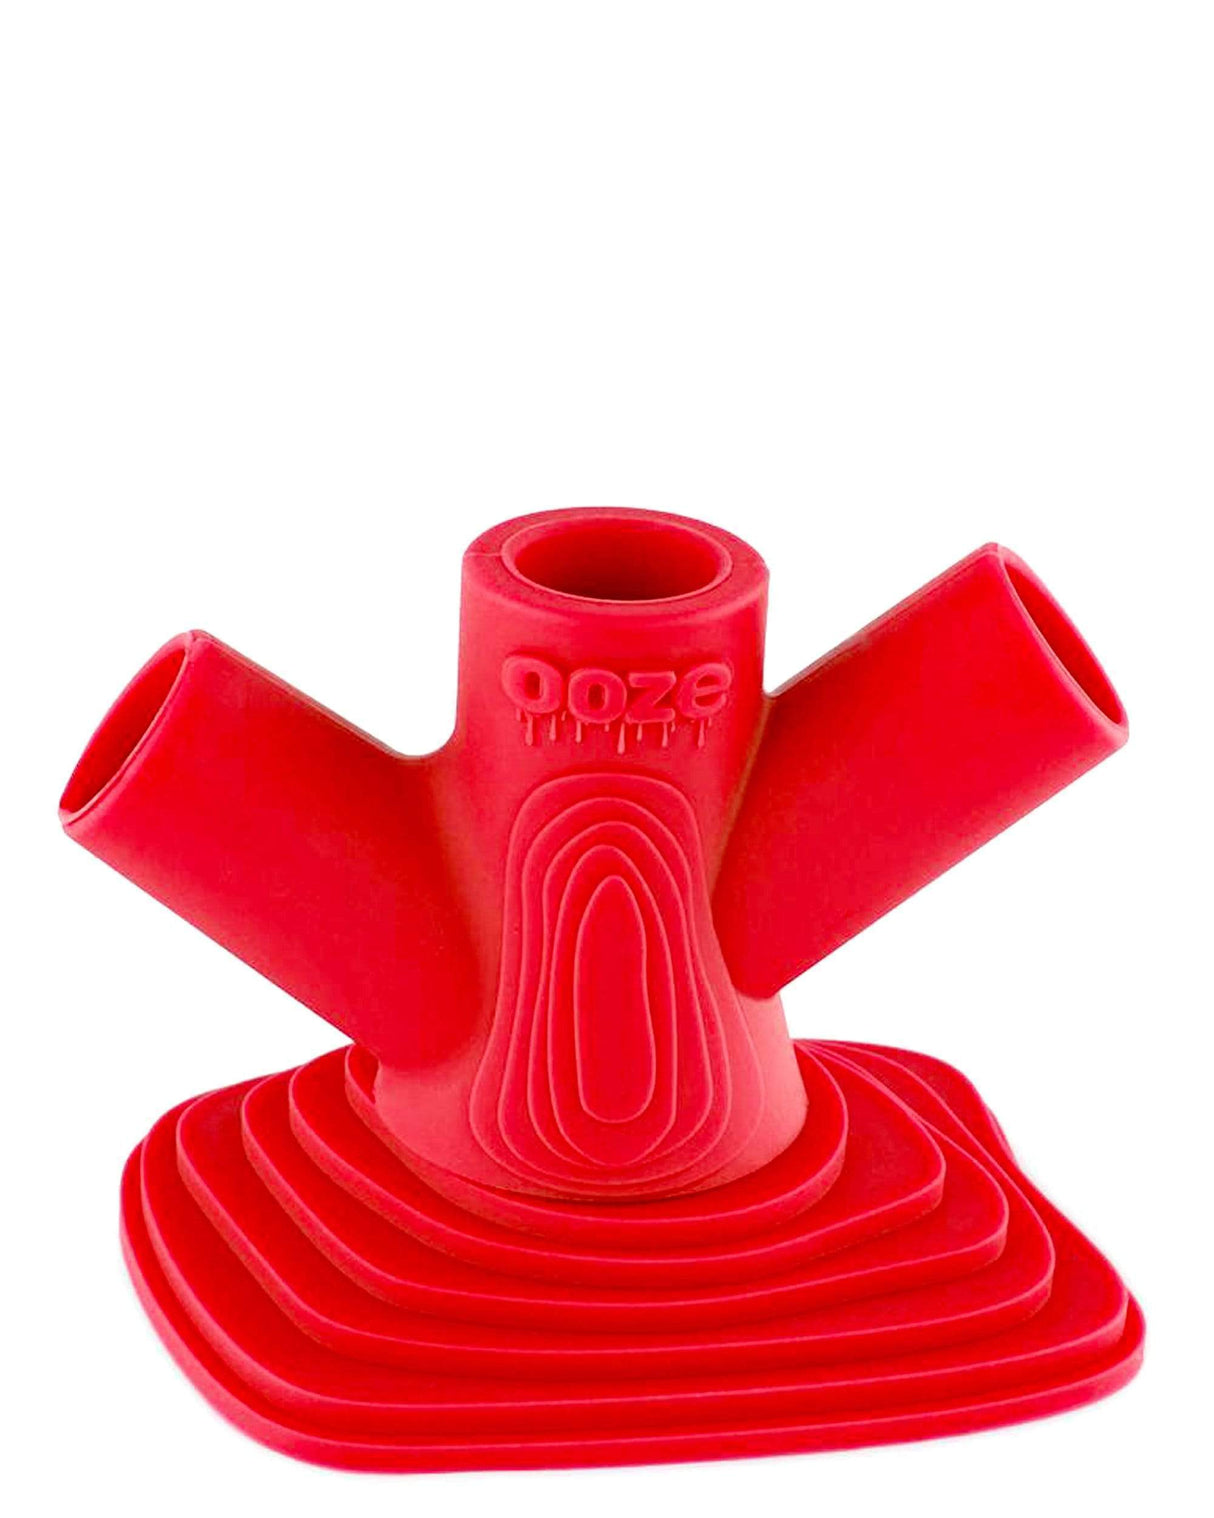 Ooze Banger Hanger Silicone Stand in Red, Front View, for 14-19mm Joints, Durable & Easy Storage